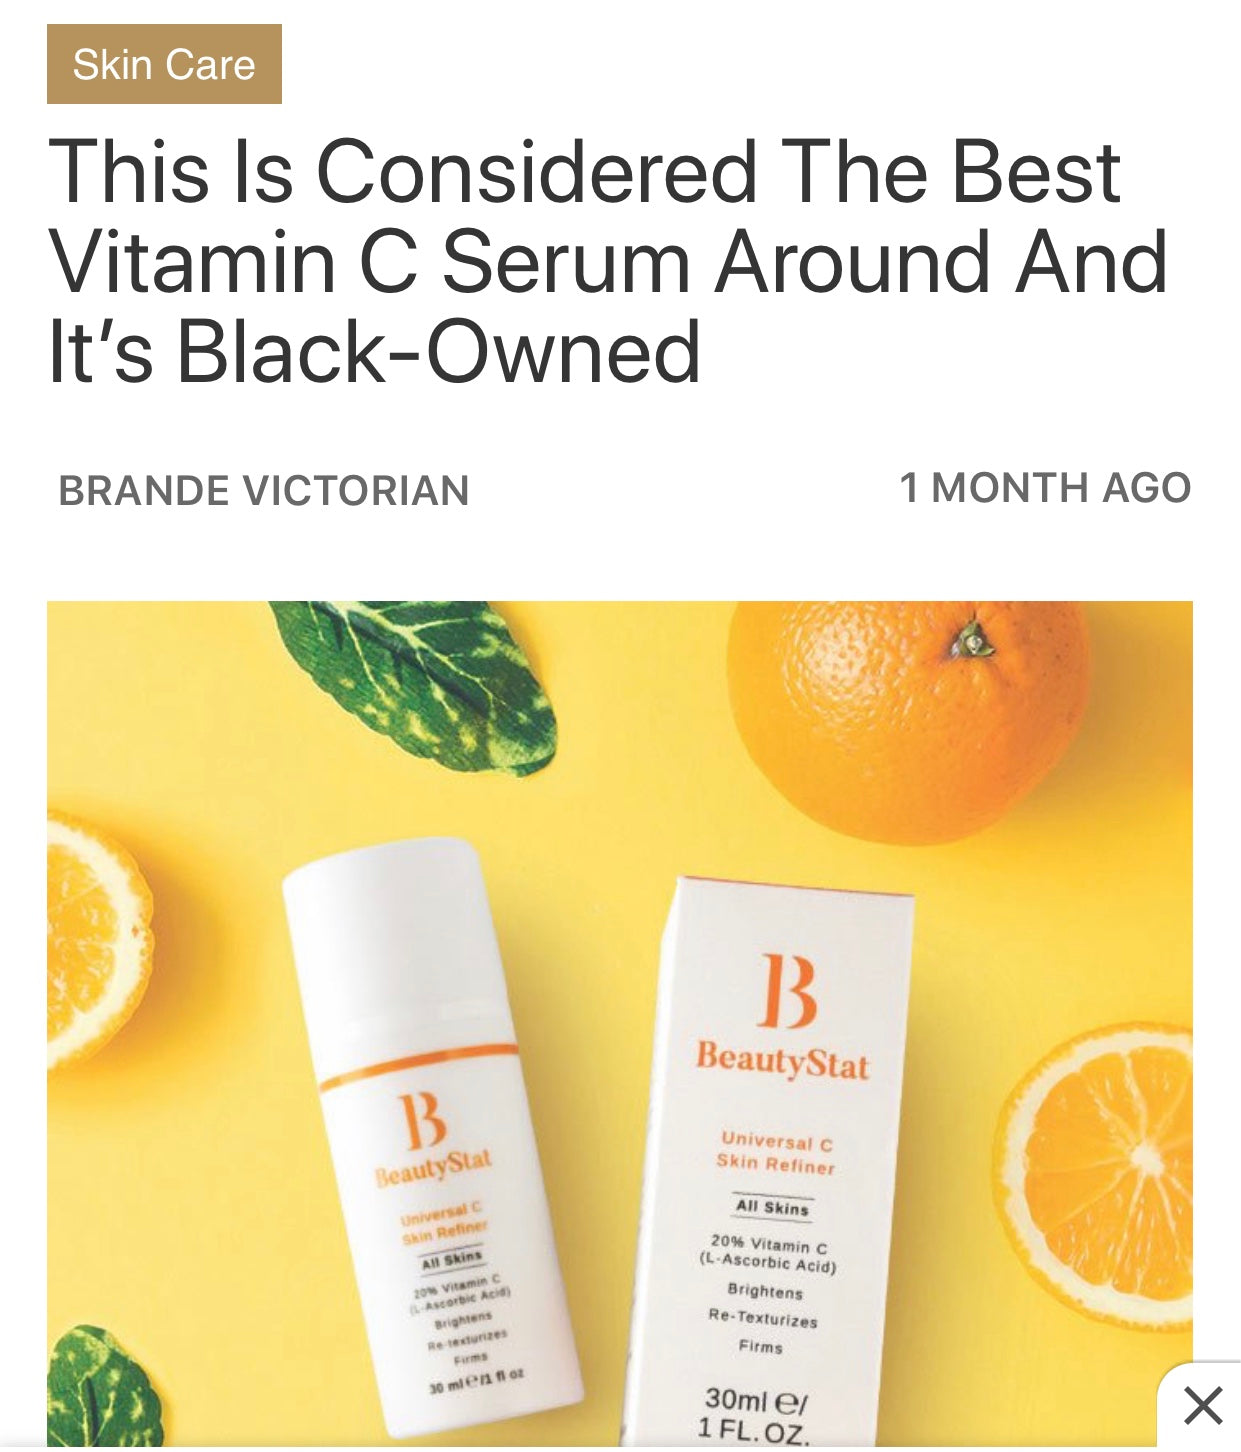 This Is Considered The Best Vitamin C Serum Around And It’s Black-Owned